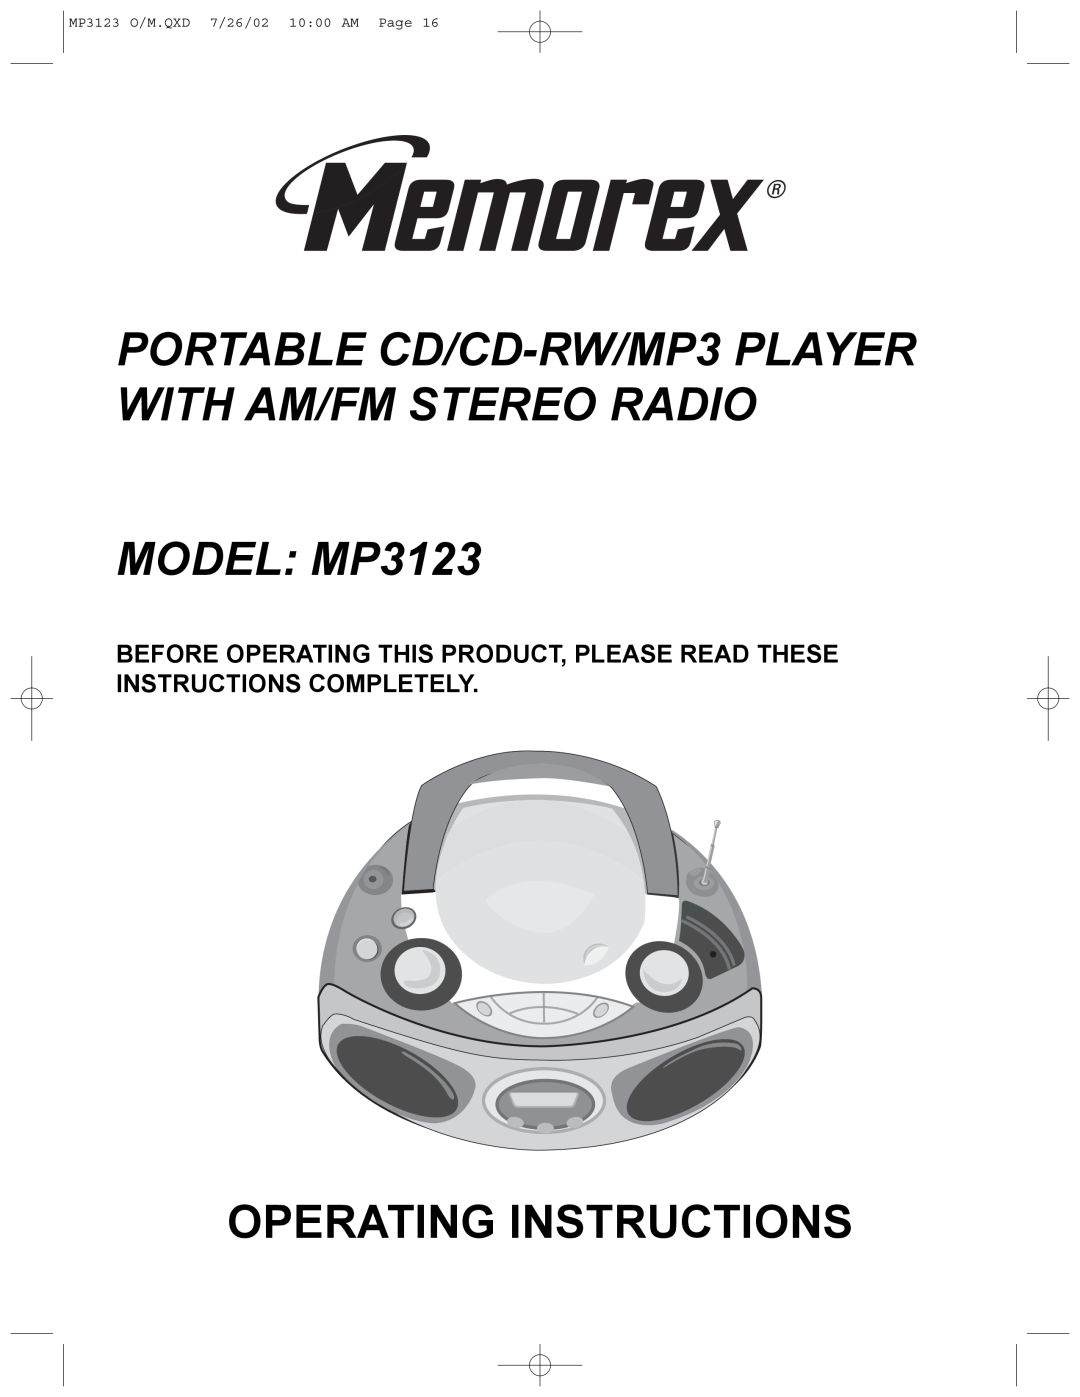 Memorex manual MODEL MP3123, Operating Instructions, MP3123 O/M.QXD 7/26/02 10 00 AM Page 